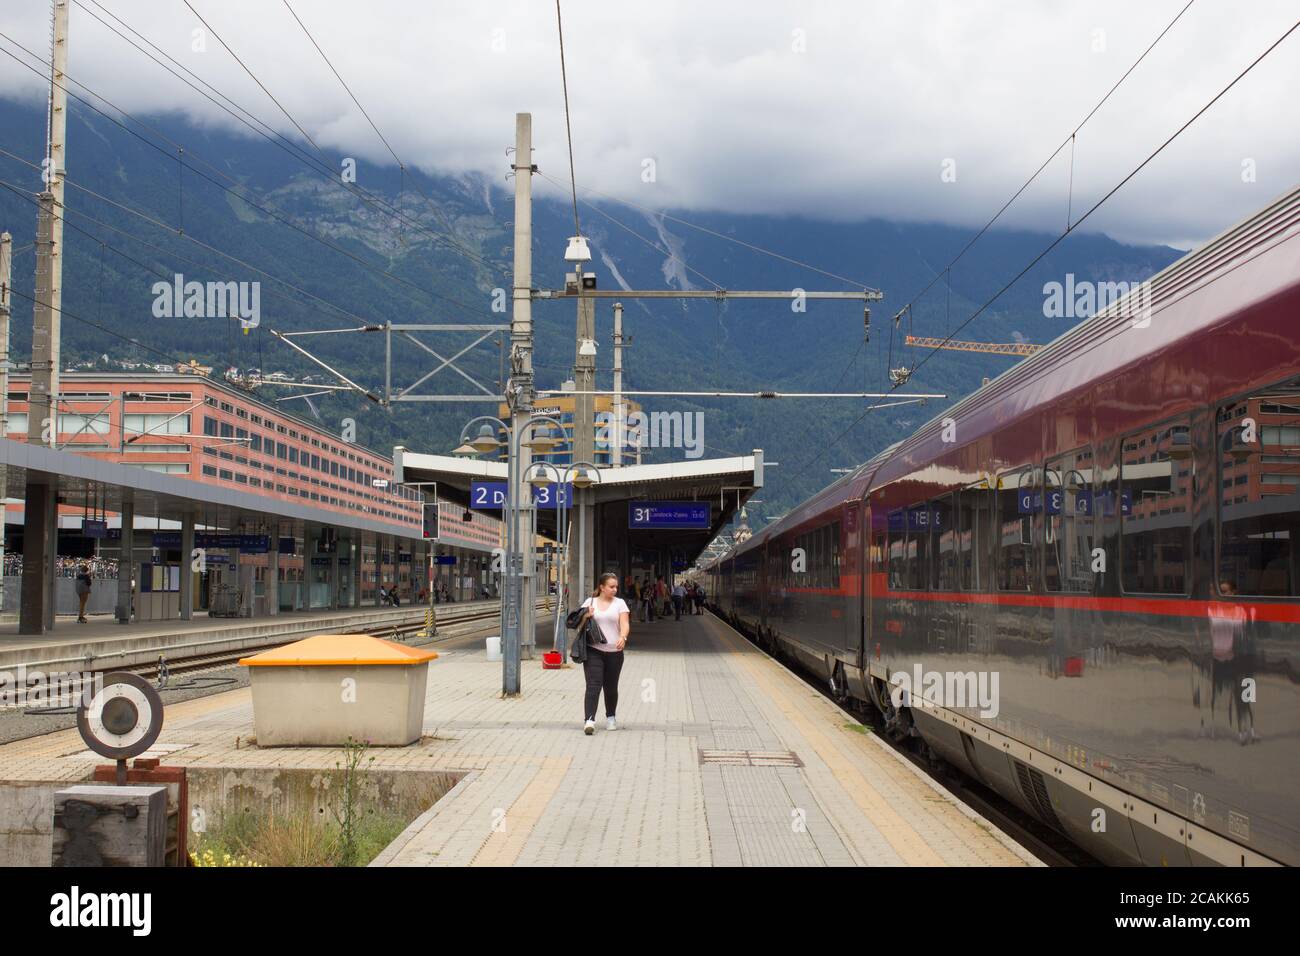 April 2020 - Innsbruck / Austria: An Austrian OBB railway train departing from the platform on the Innsbruck Main Railway Station on a cloudy day with Stock Photo